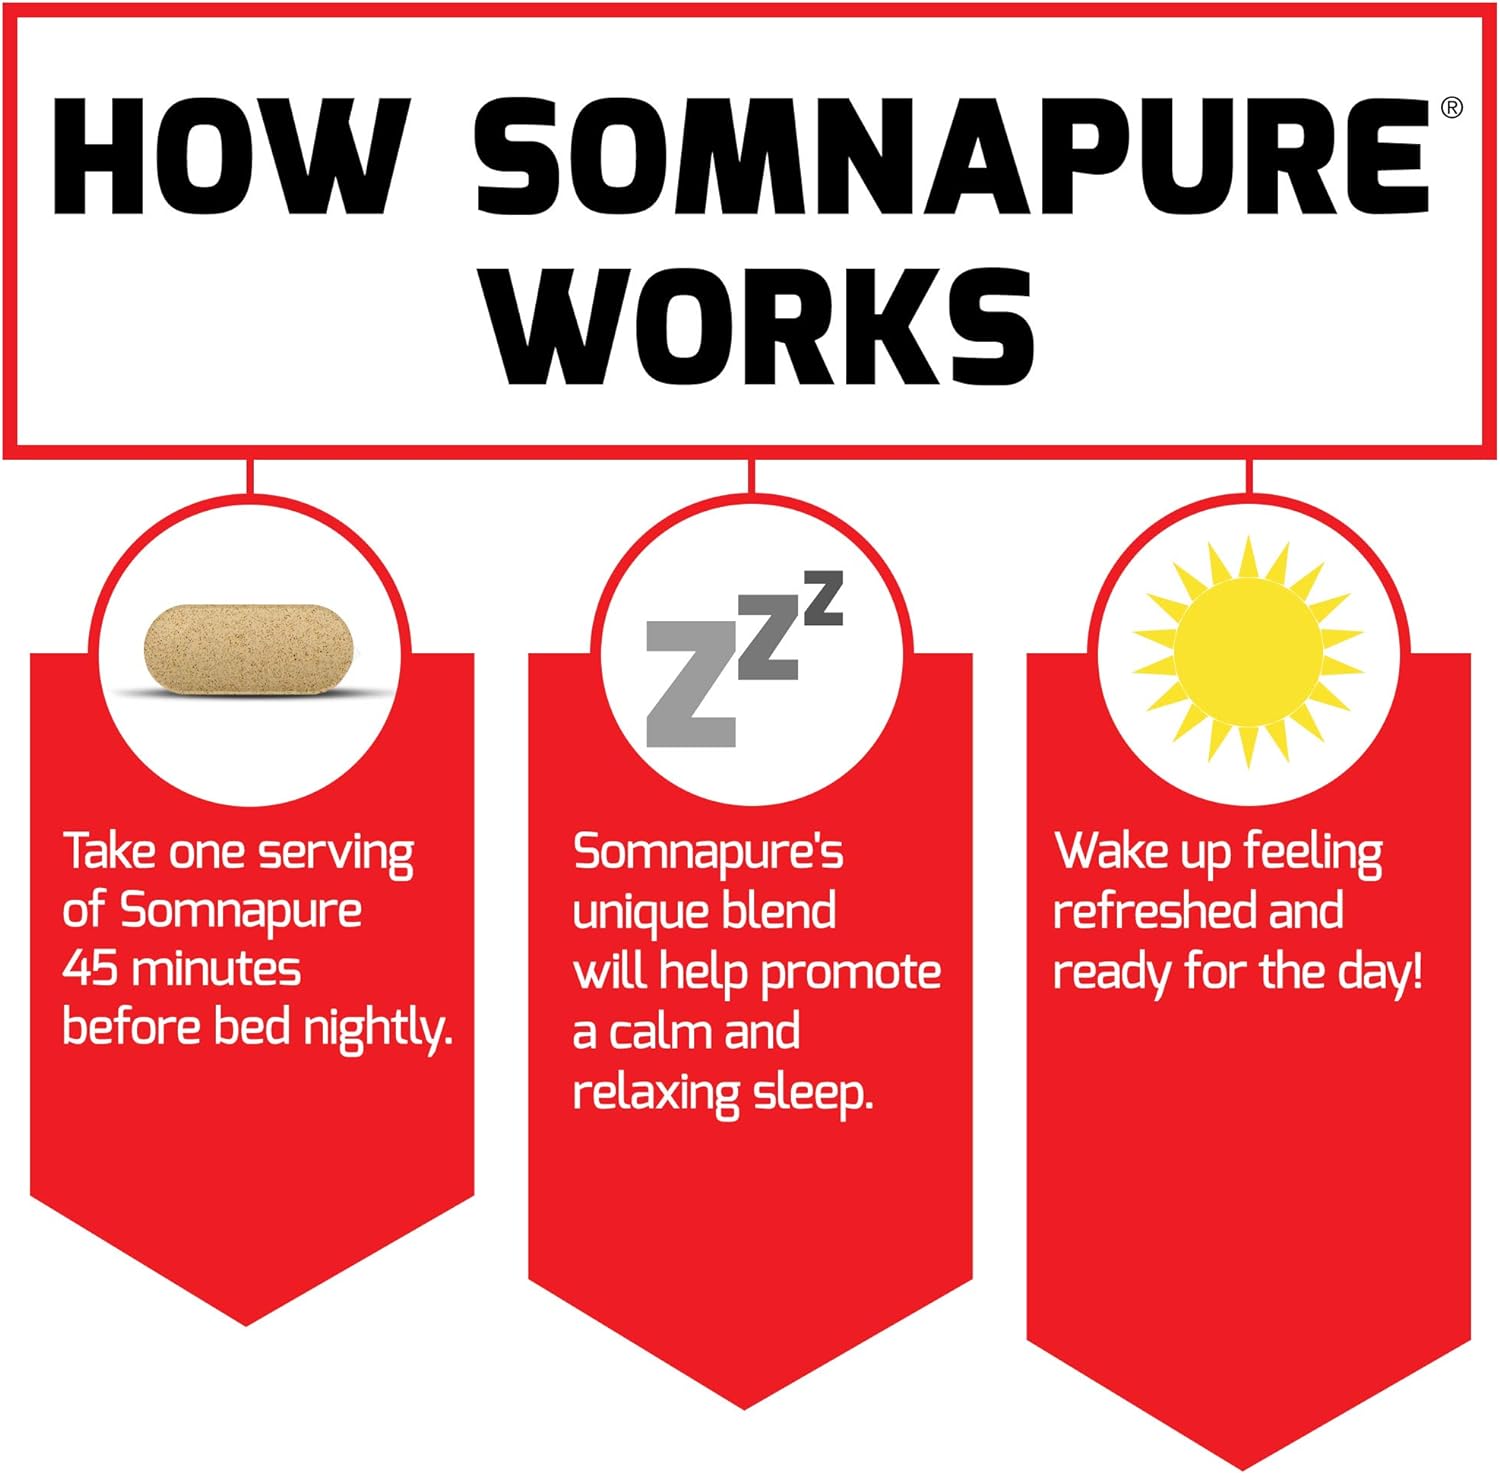 Force Factor Somnapure, 3-Pack, Sleep Support for Adults for Occasional Sleeplessness with Melatonin & Valerian, Non-Habit-Forming Sleeping Pills, Fall Asleep Faster, Wake Up Refreshed, 90 Tablets : Health & Household